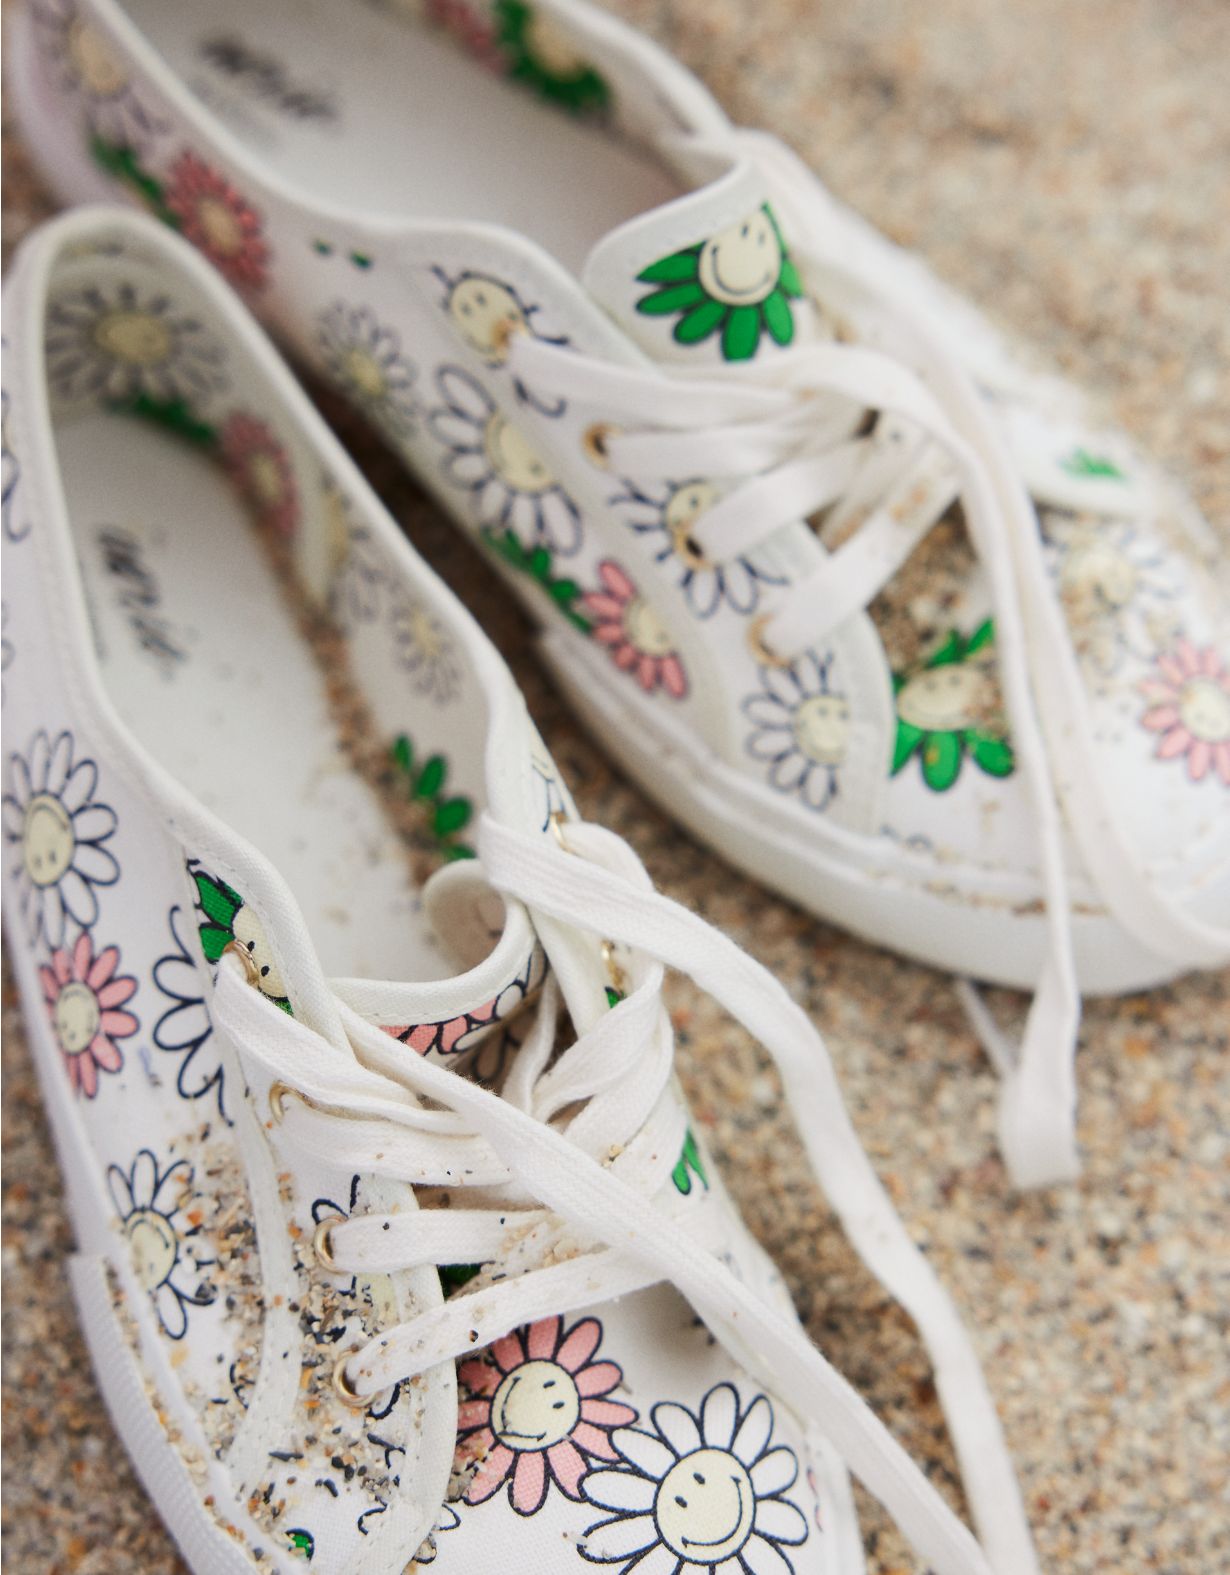 Aerie Smiley® Lace Up Sneakers